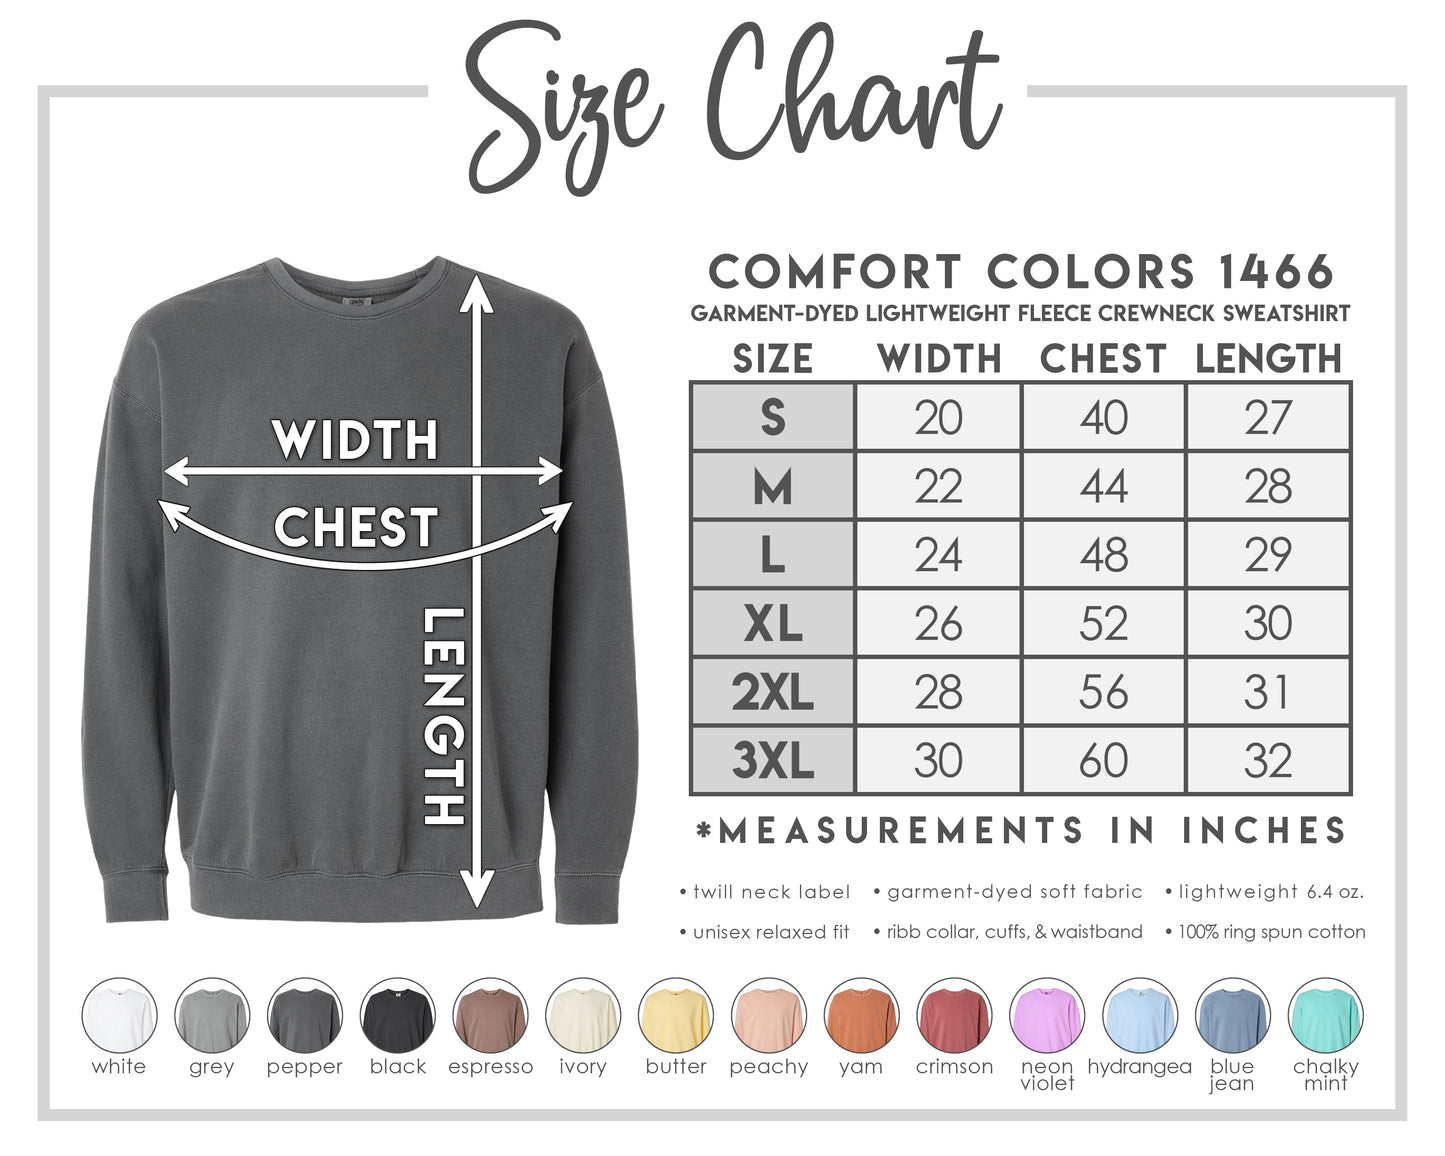 Home Plate Social Club Shirt -- Embroidered, Lightweight Sweatshirt, Comfort Colors